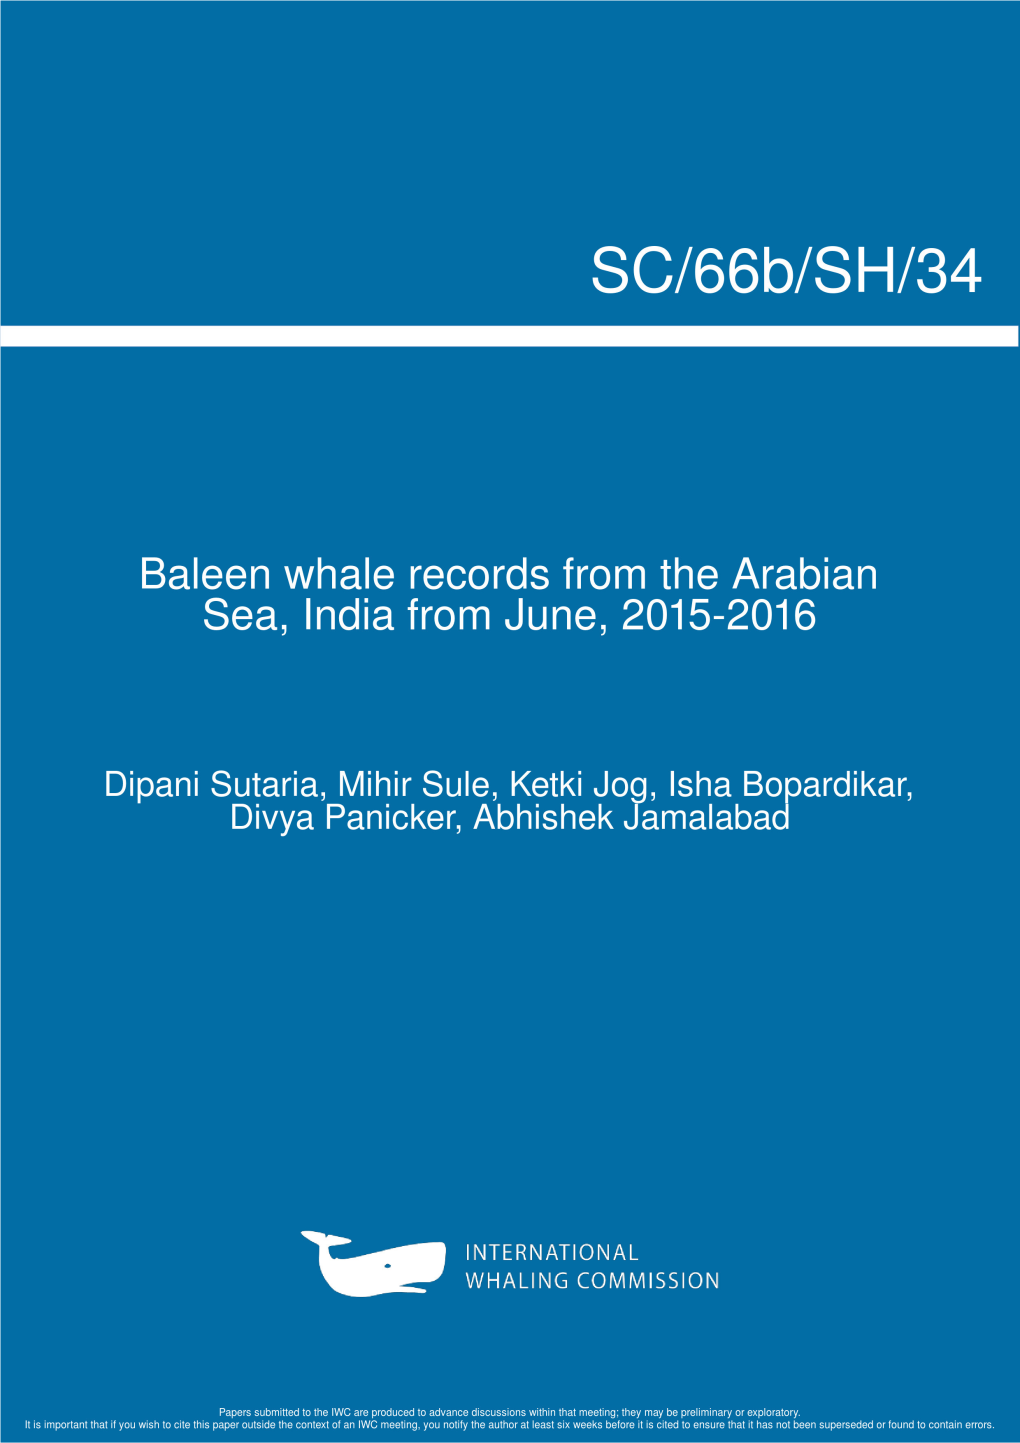 Baleen Whale Records from the Arabian Sea, India from June 2015